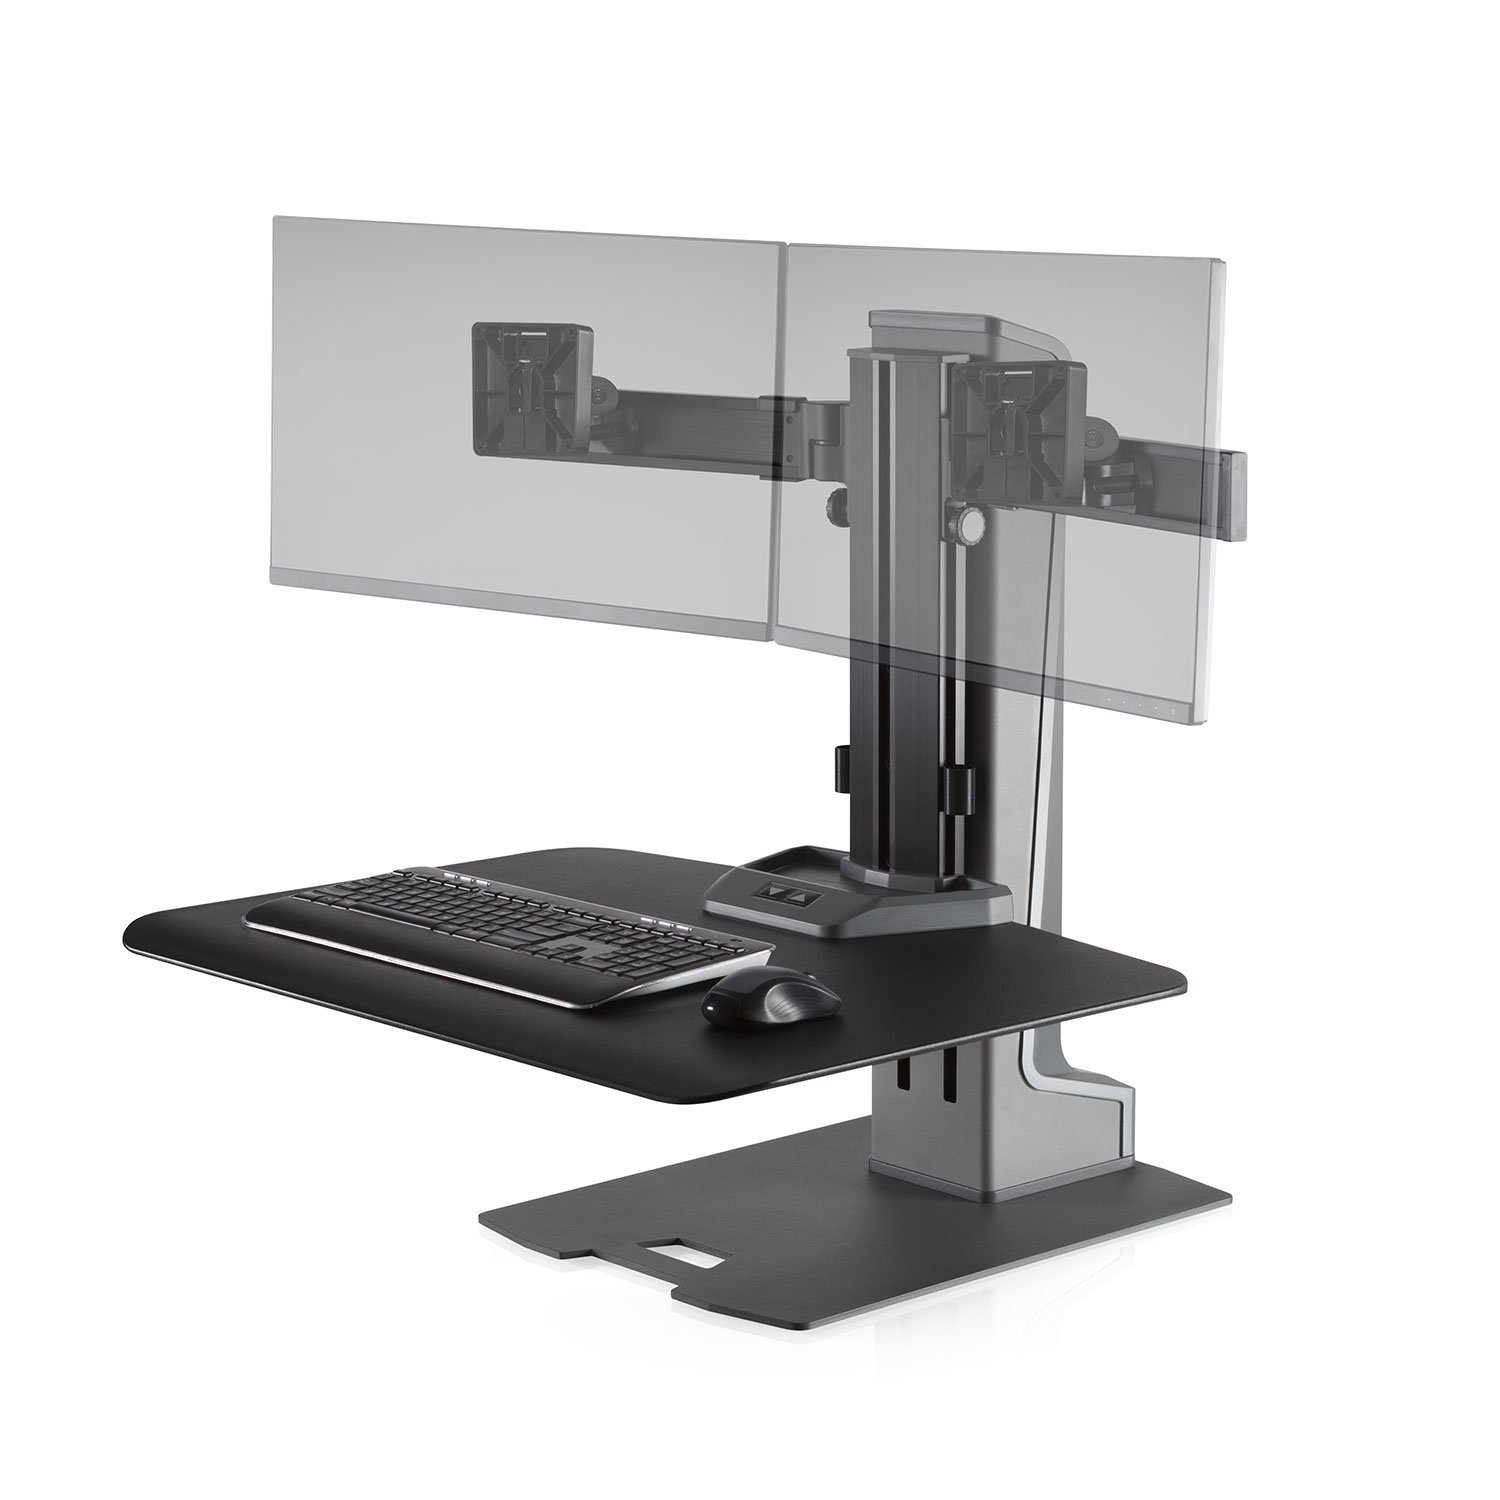 https://www.ergodirect.com/images/Innovative_LCD_Arms/18483/large/Innovative-Winston-E-Electric-Dual-Monitor-Sit-Stand-Workstation_lg_1699522885.jpg